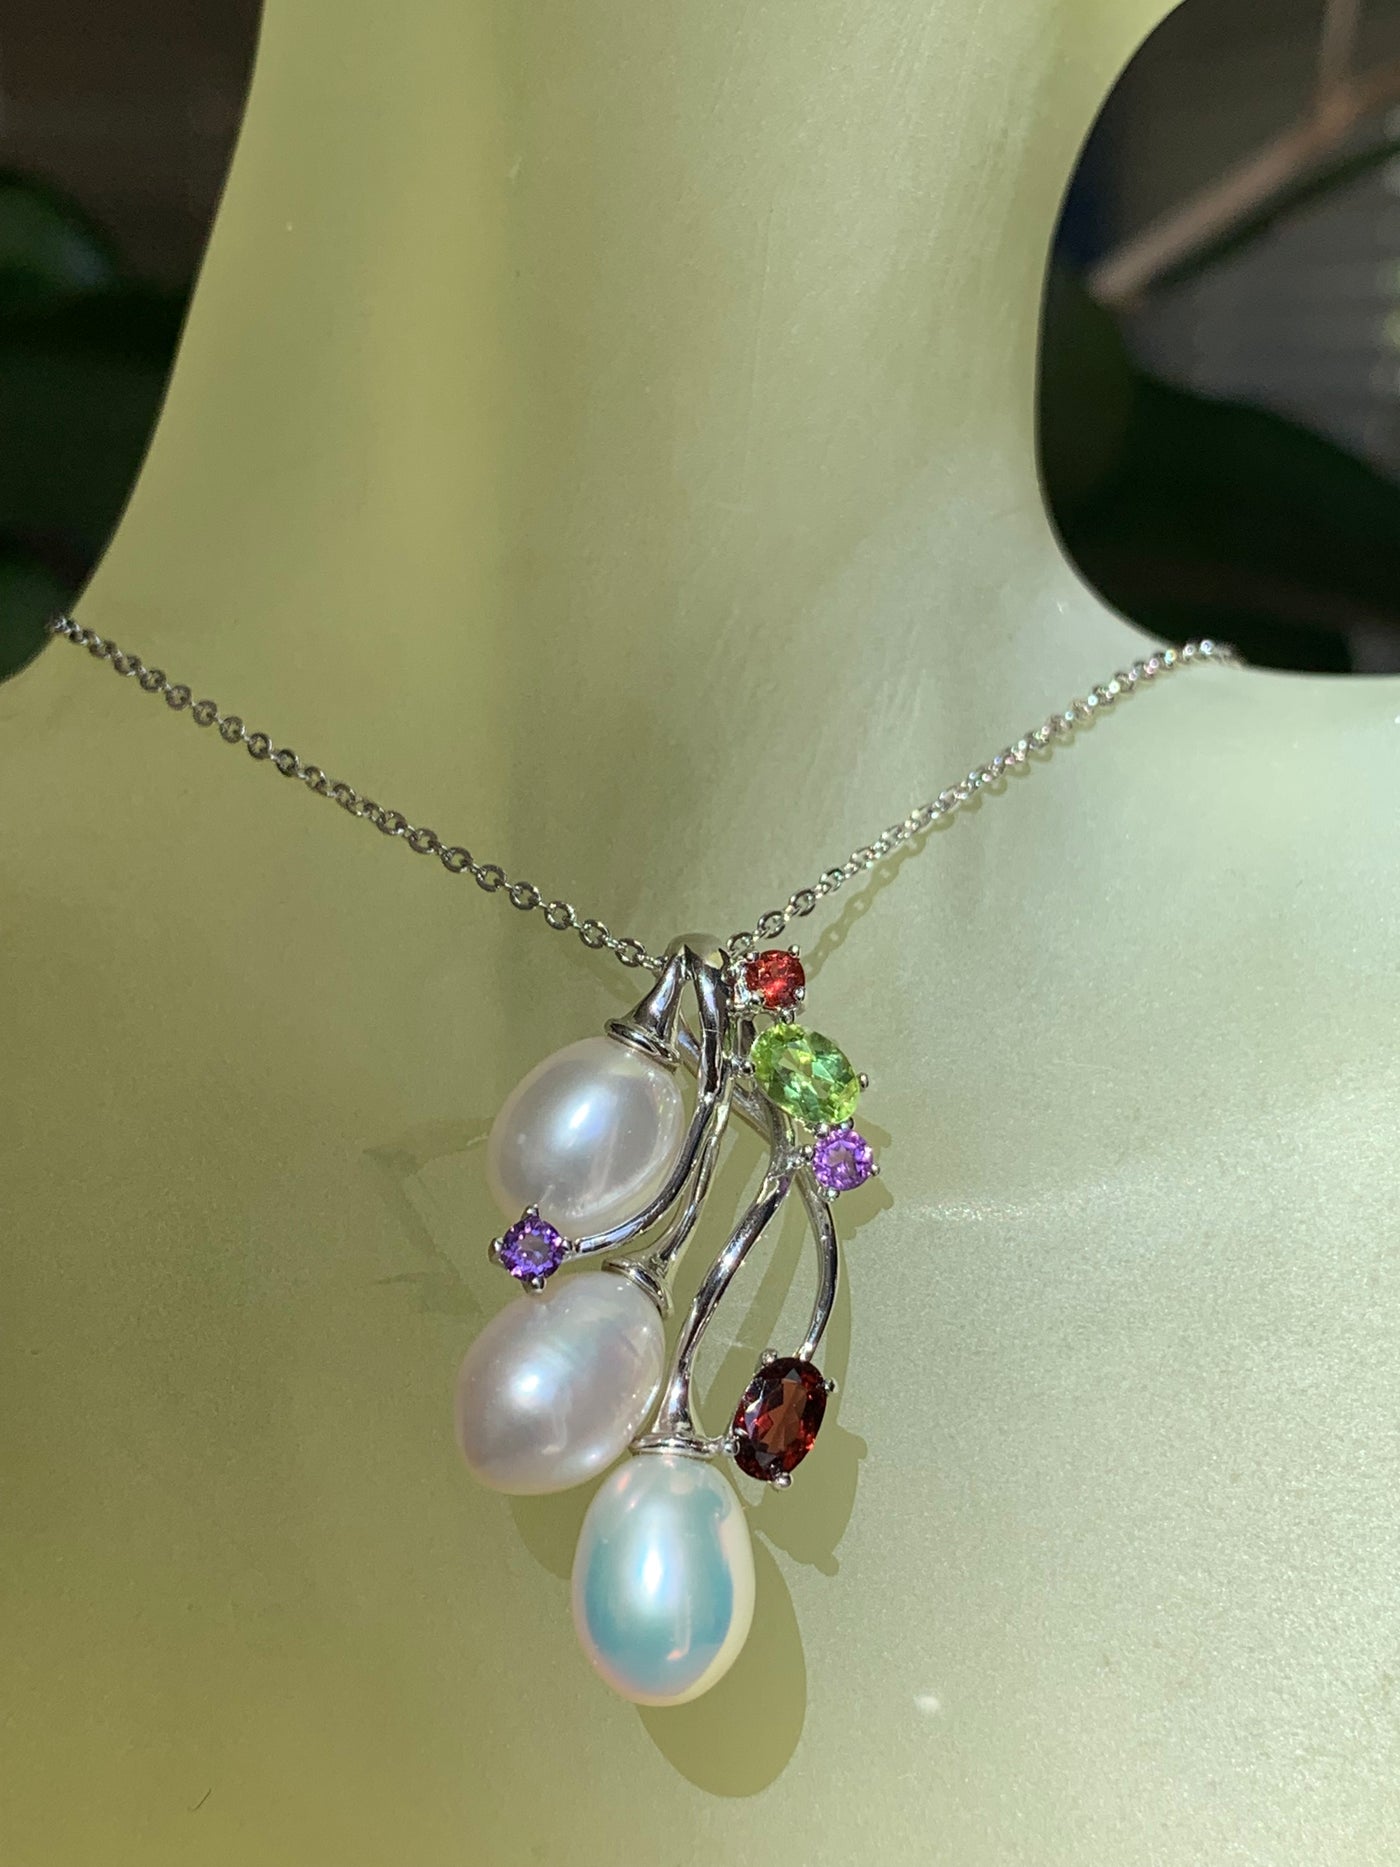 3 Oval Pearl Pendant with Amethyst Garnet Peridot Accent in Silver